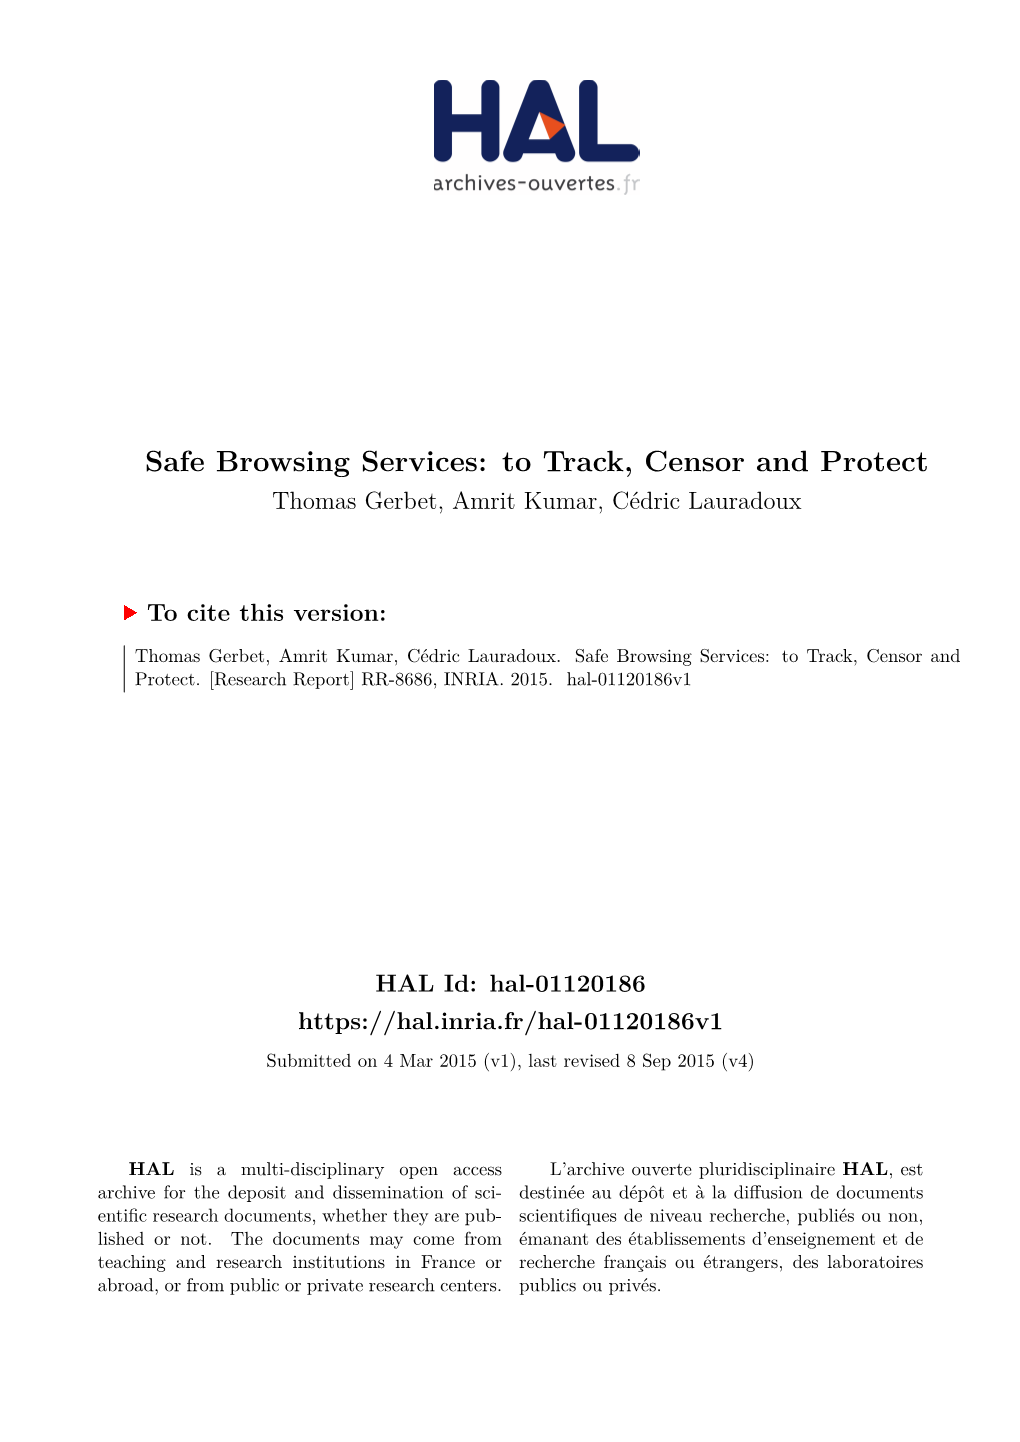 Safe Browsing Services: to Track, Censor and Protect Thomas Gerbet, Amrit Kumar, Cédric Lauradoux